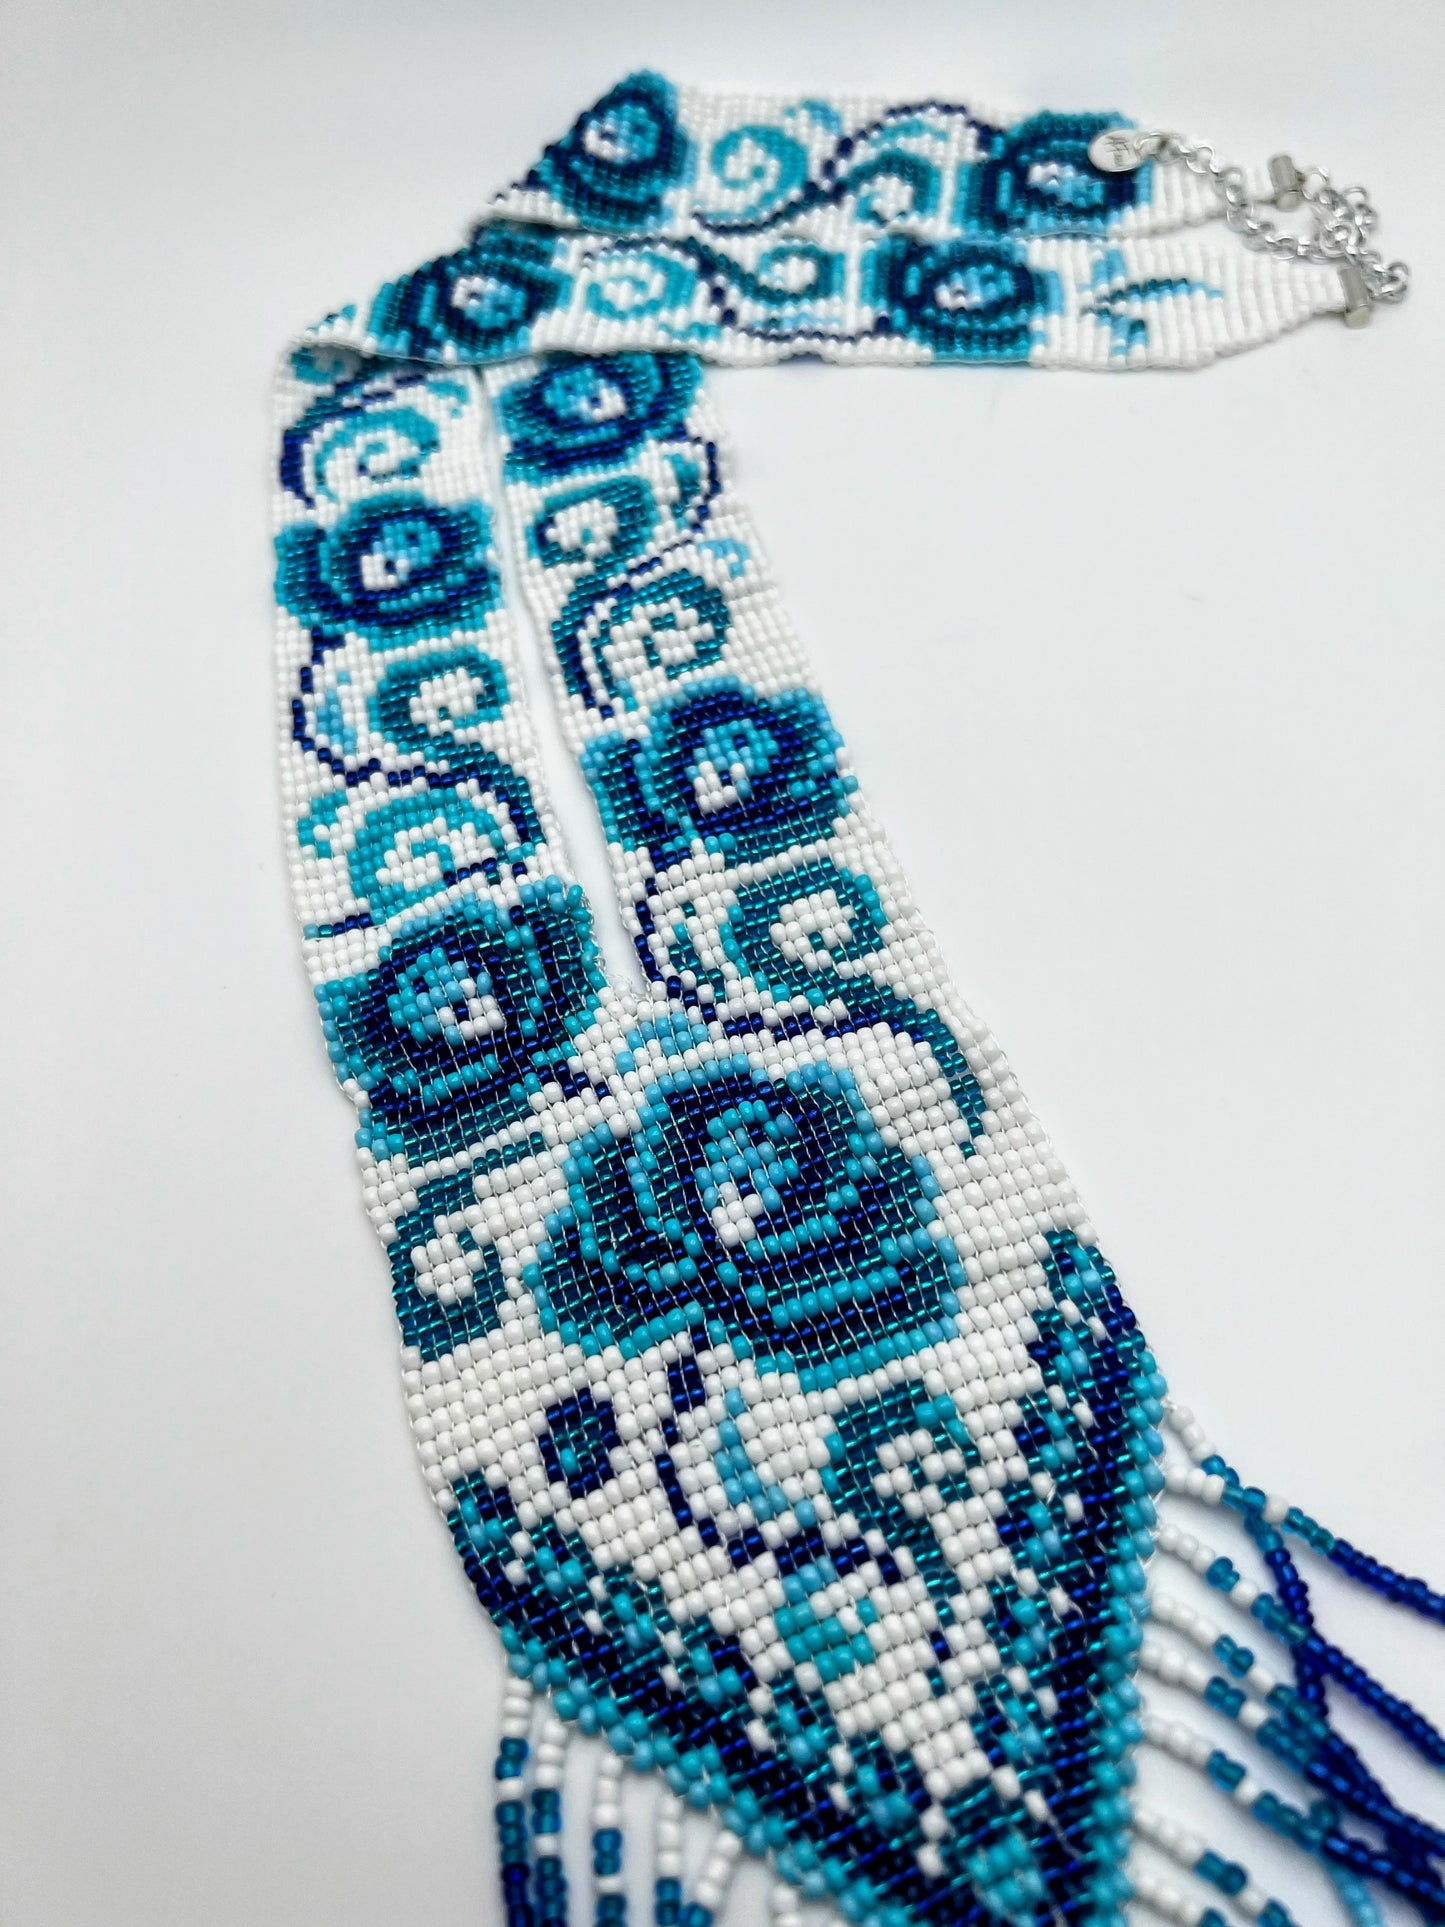 Light Blue Loom Beaded Necklaces (2 Styles)